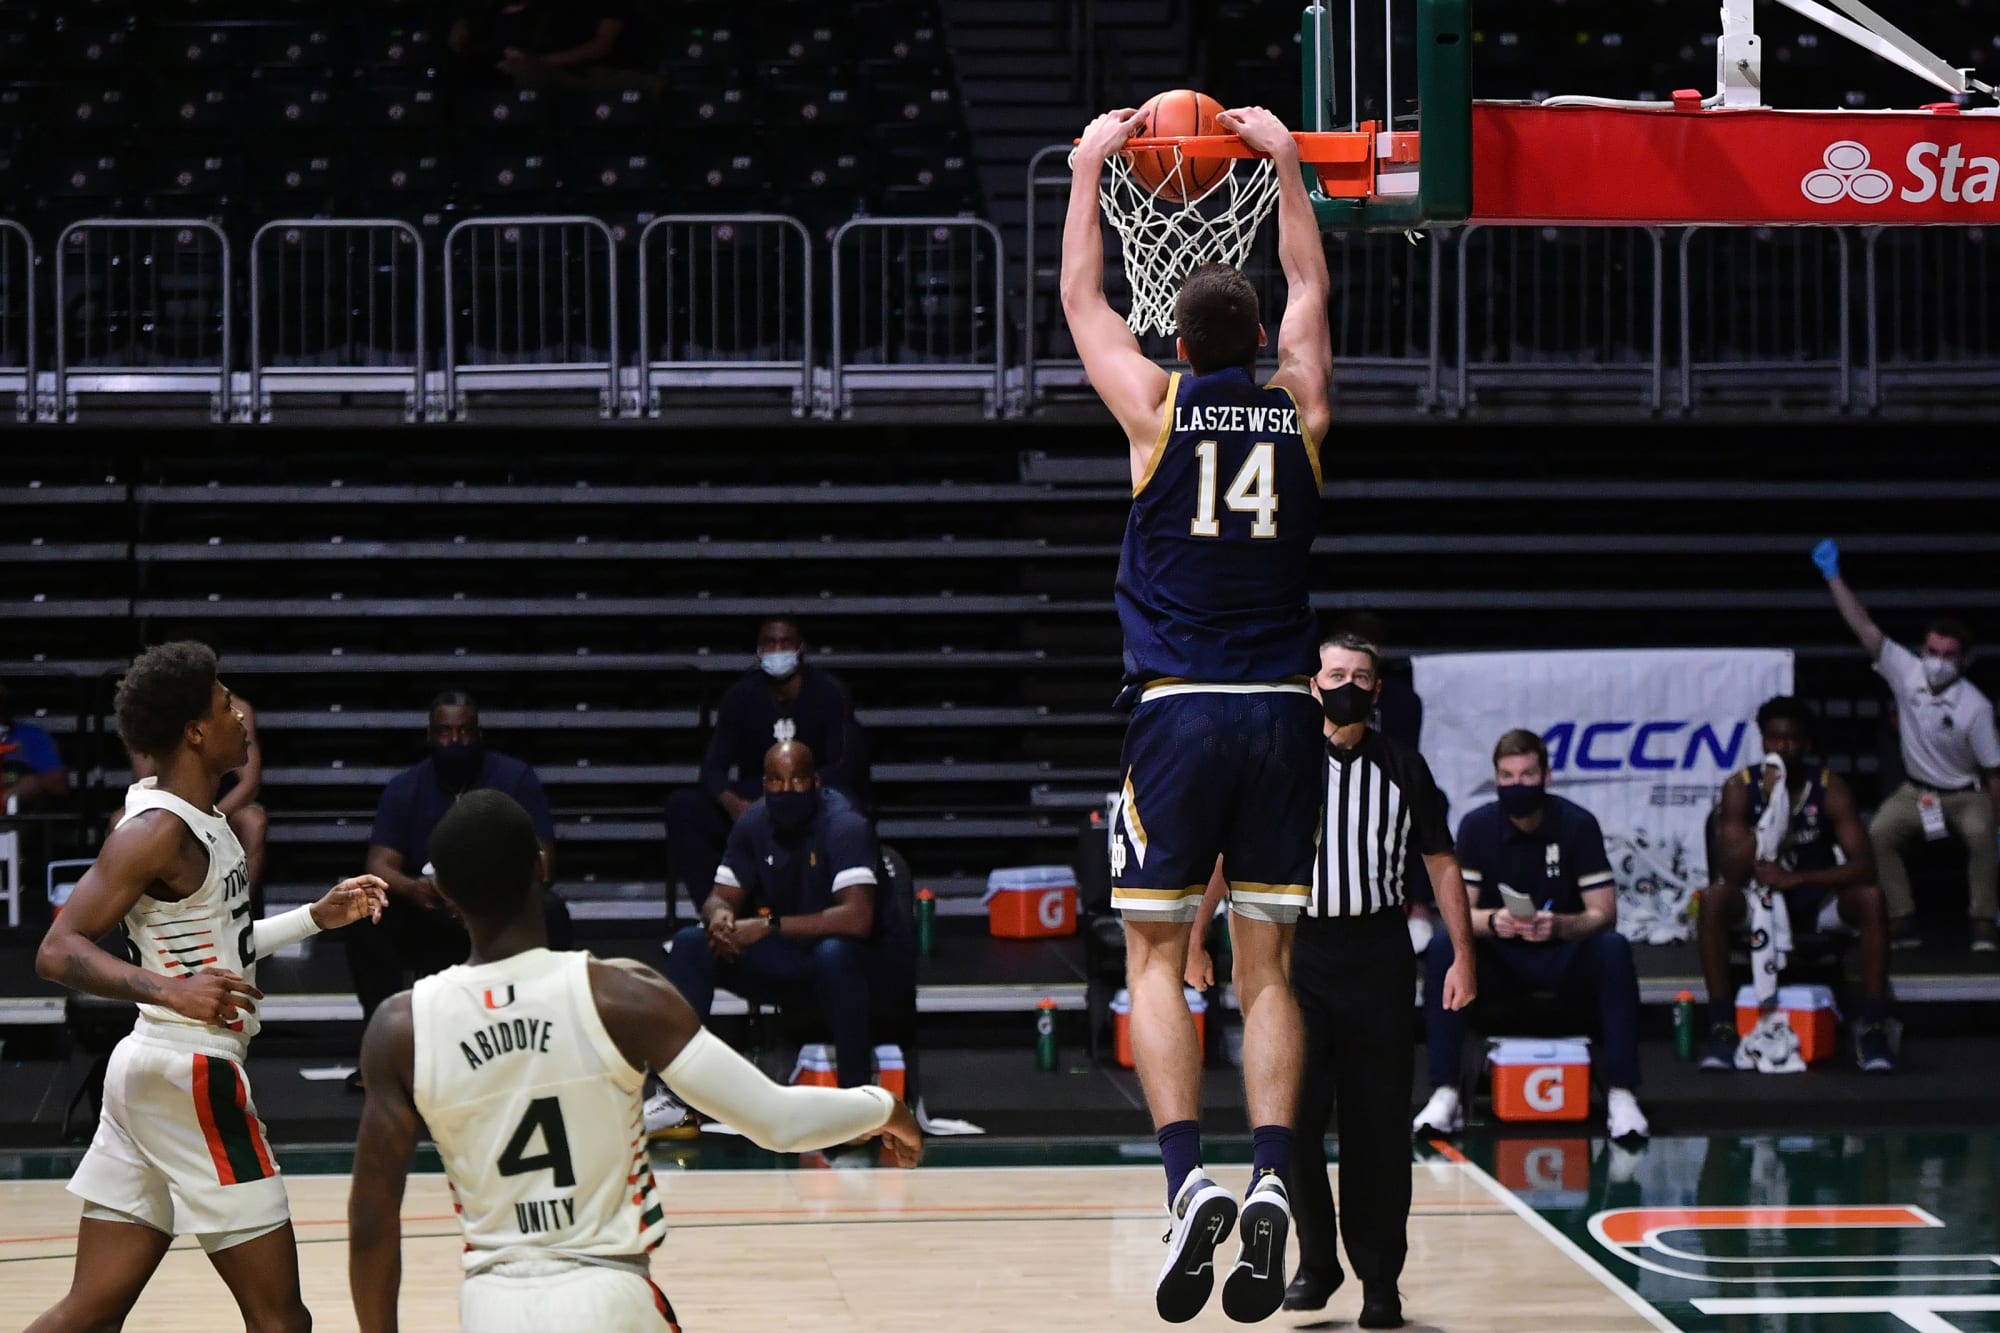 Notre Dame Men's Basketball: 3 things we learned in win over Miami